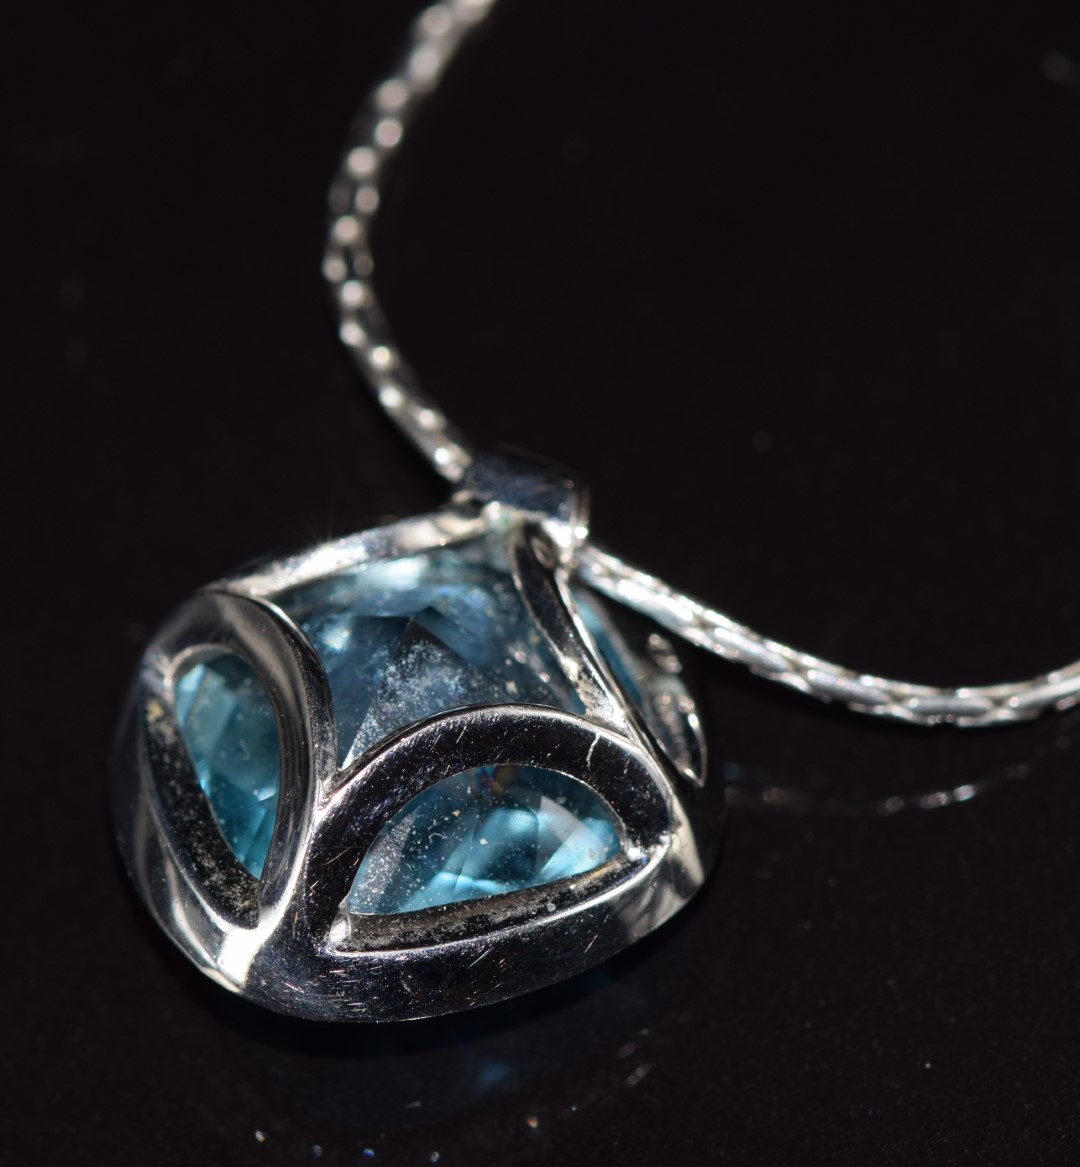 An 18ct white gold pendant set with a blue topaz and diamonds, on 18ct white gold chain, 15.1g - Image 5 of 5